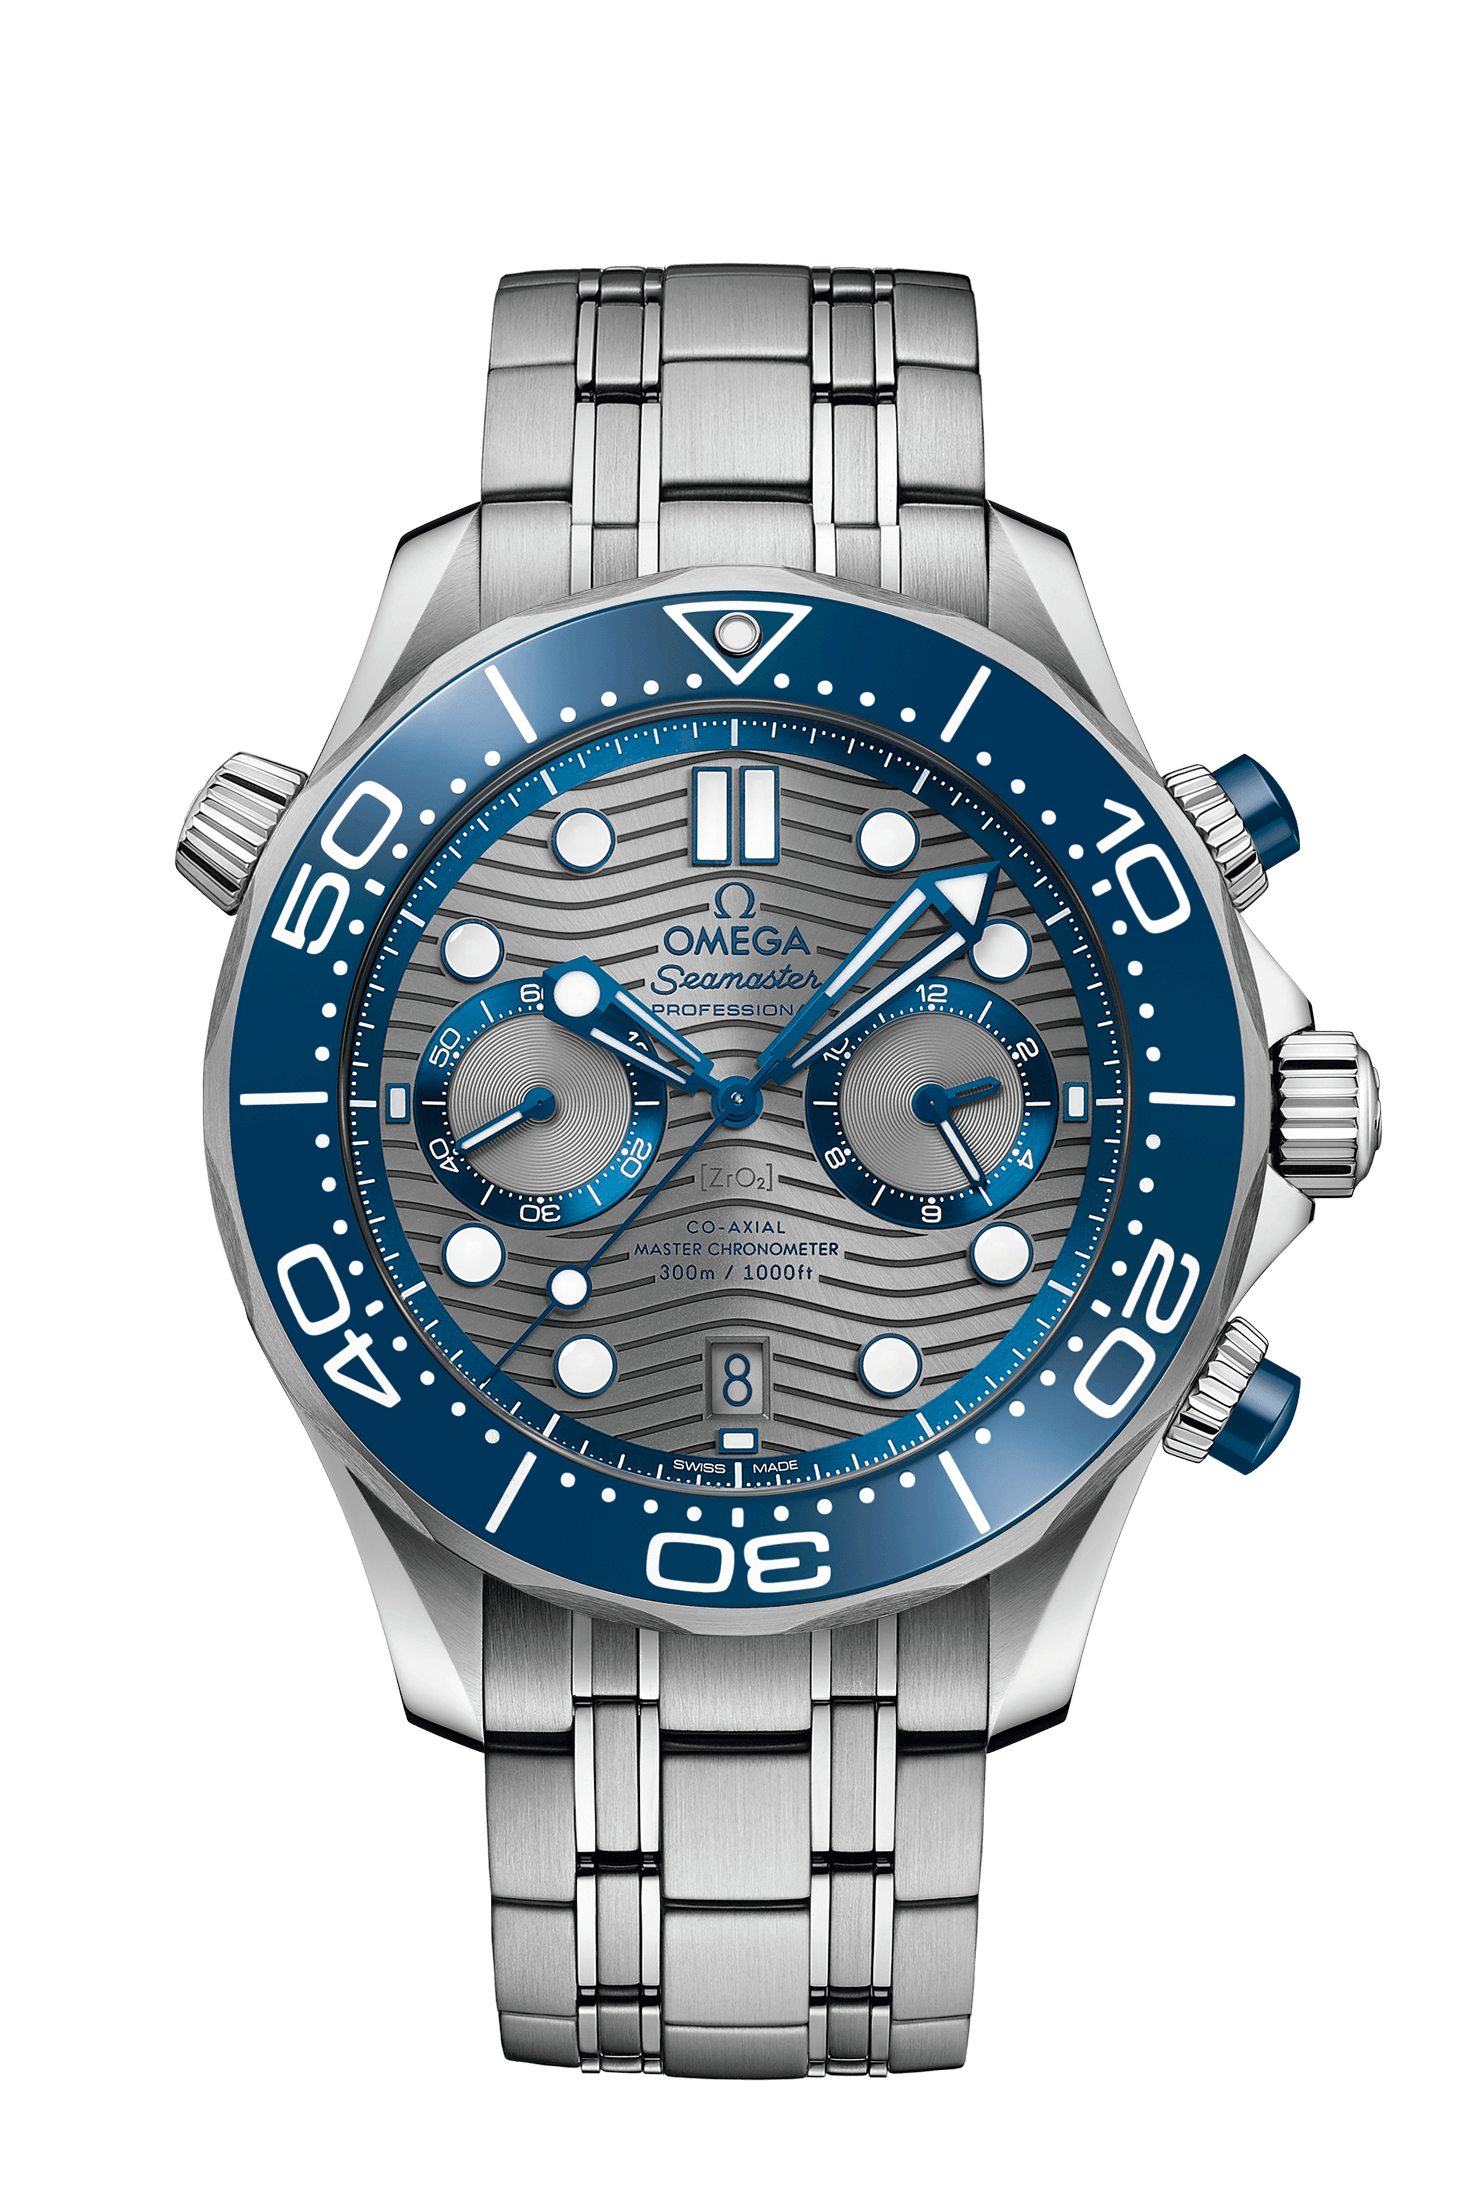 Diver 300M Chronographe Co‑Axial Master Chronometer 44 mm